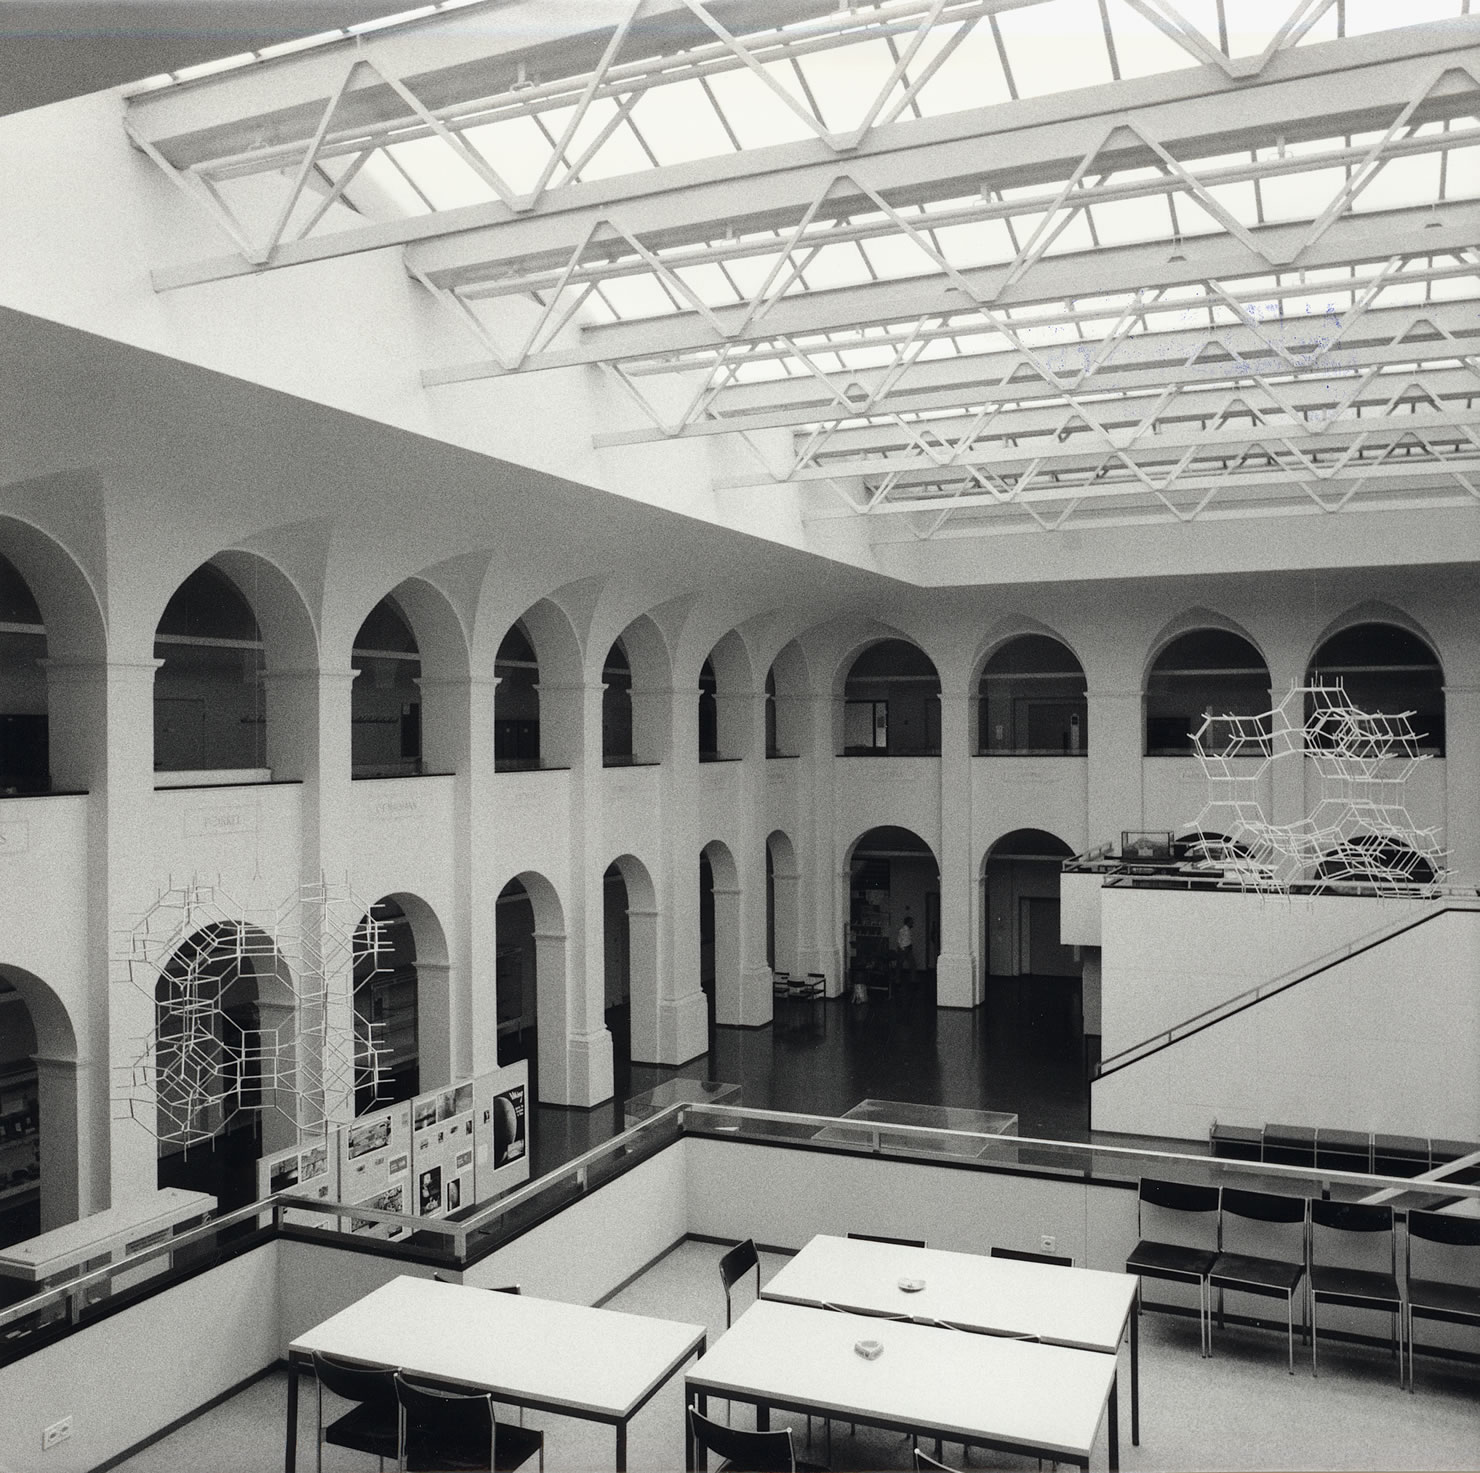 Enlarged view: Hall is 2 levels high, there are balcony-like constructions in the atrium